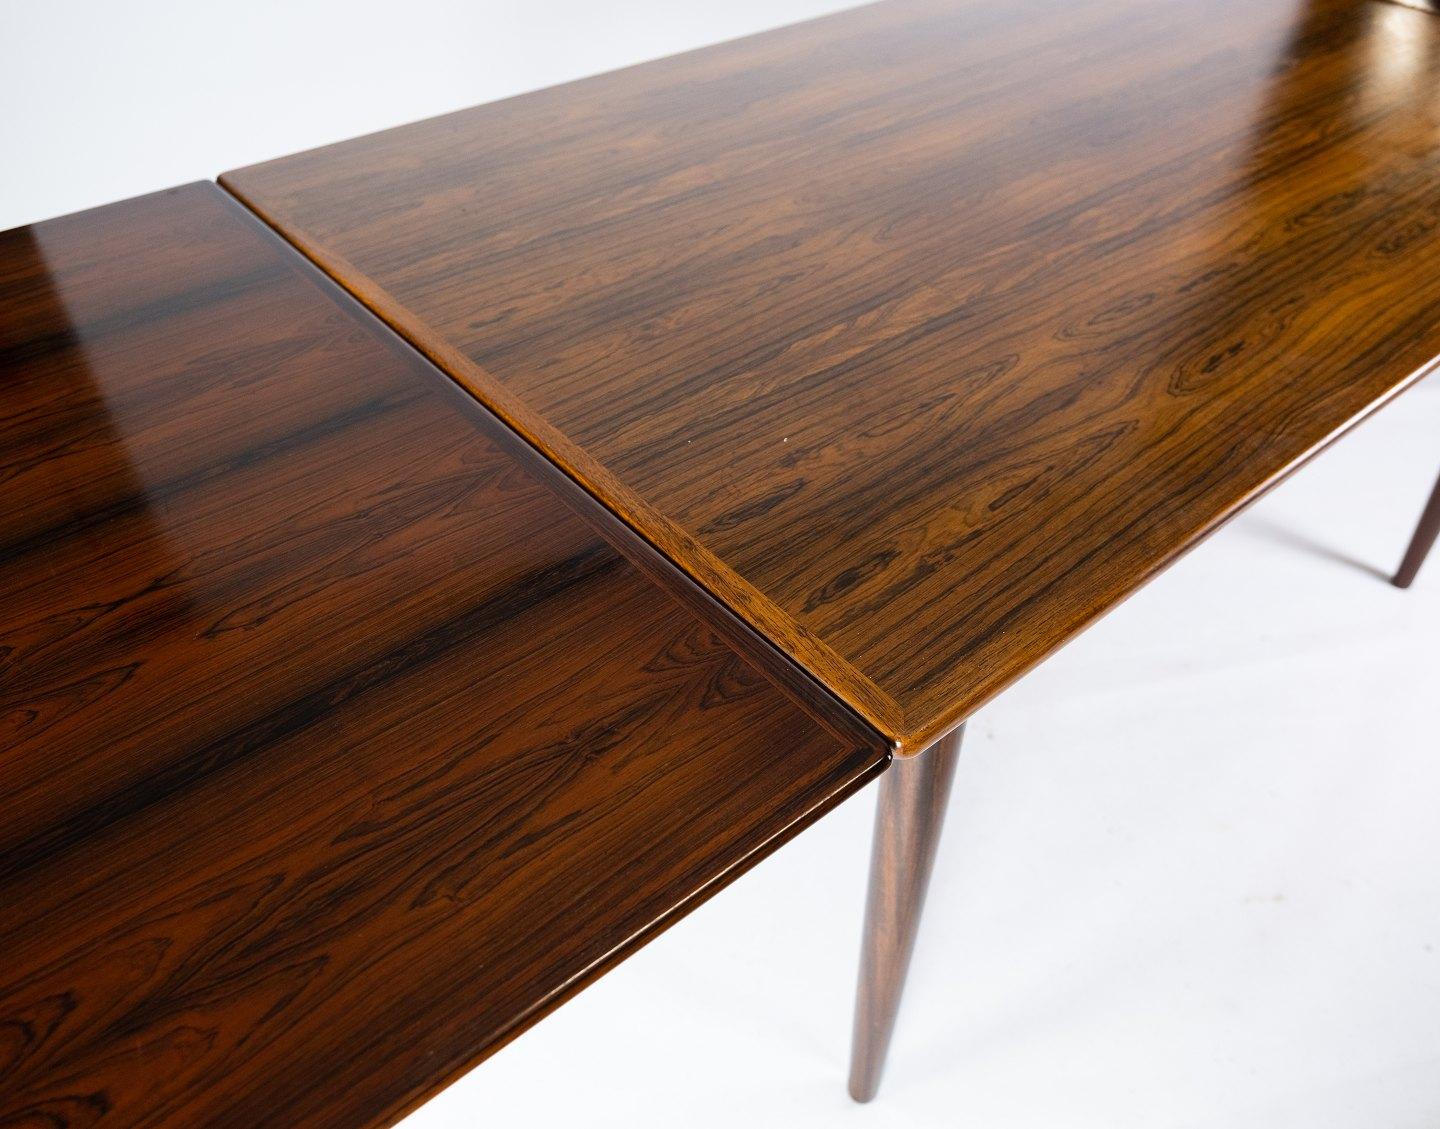 Scandinavian Modern Dining Table in Rosewood with Extensions, Designed by Arne Vodder from the 1960s For Sale